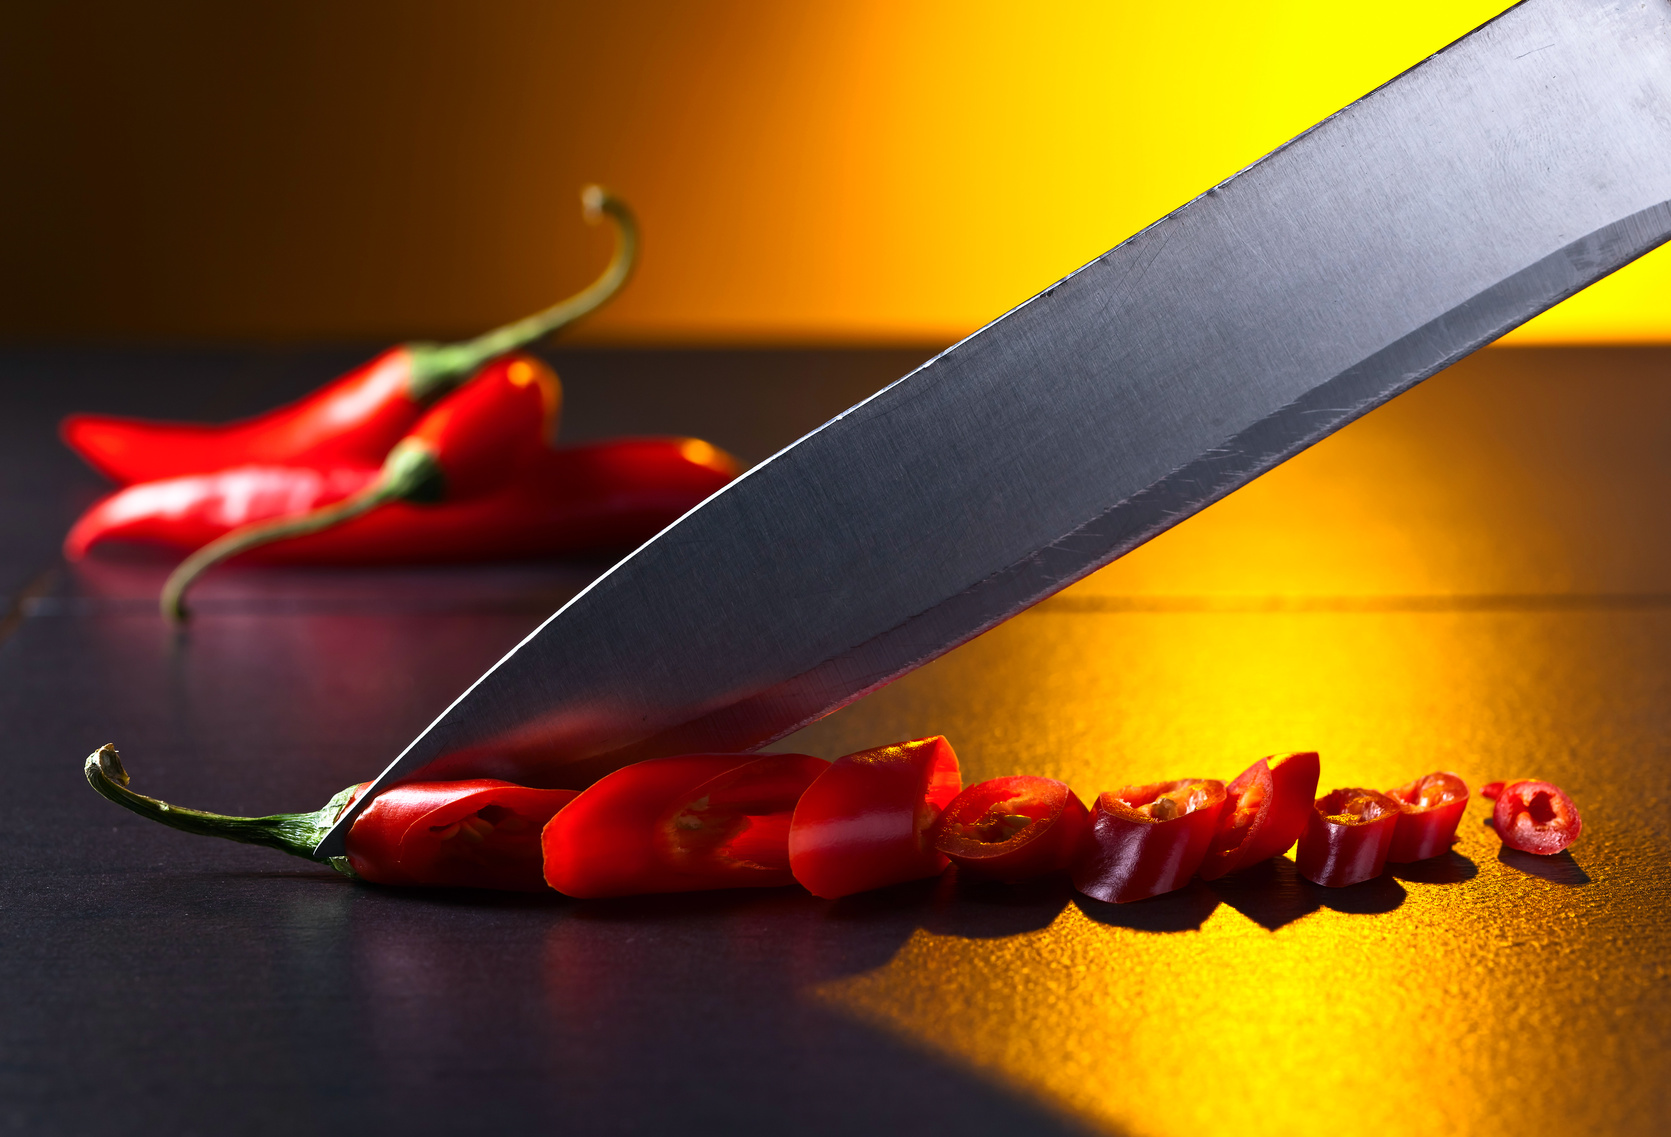 Knife and red chilli pepper on black table